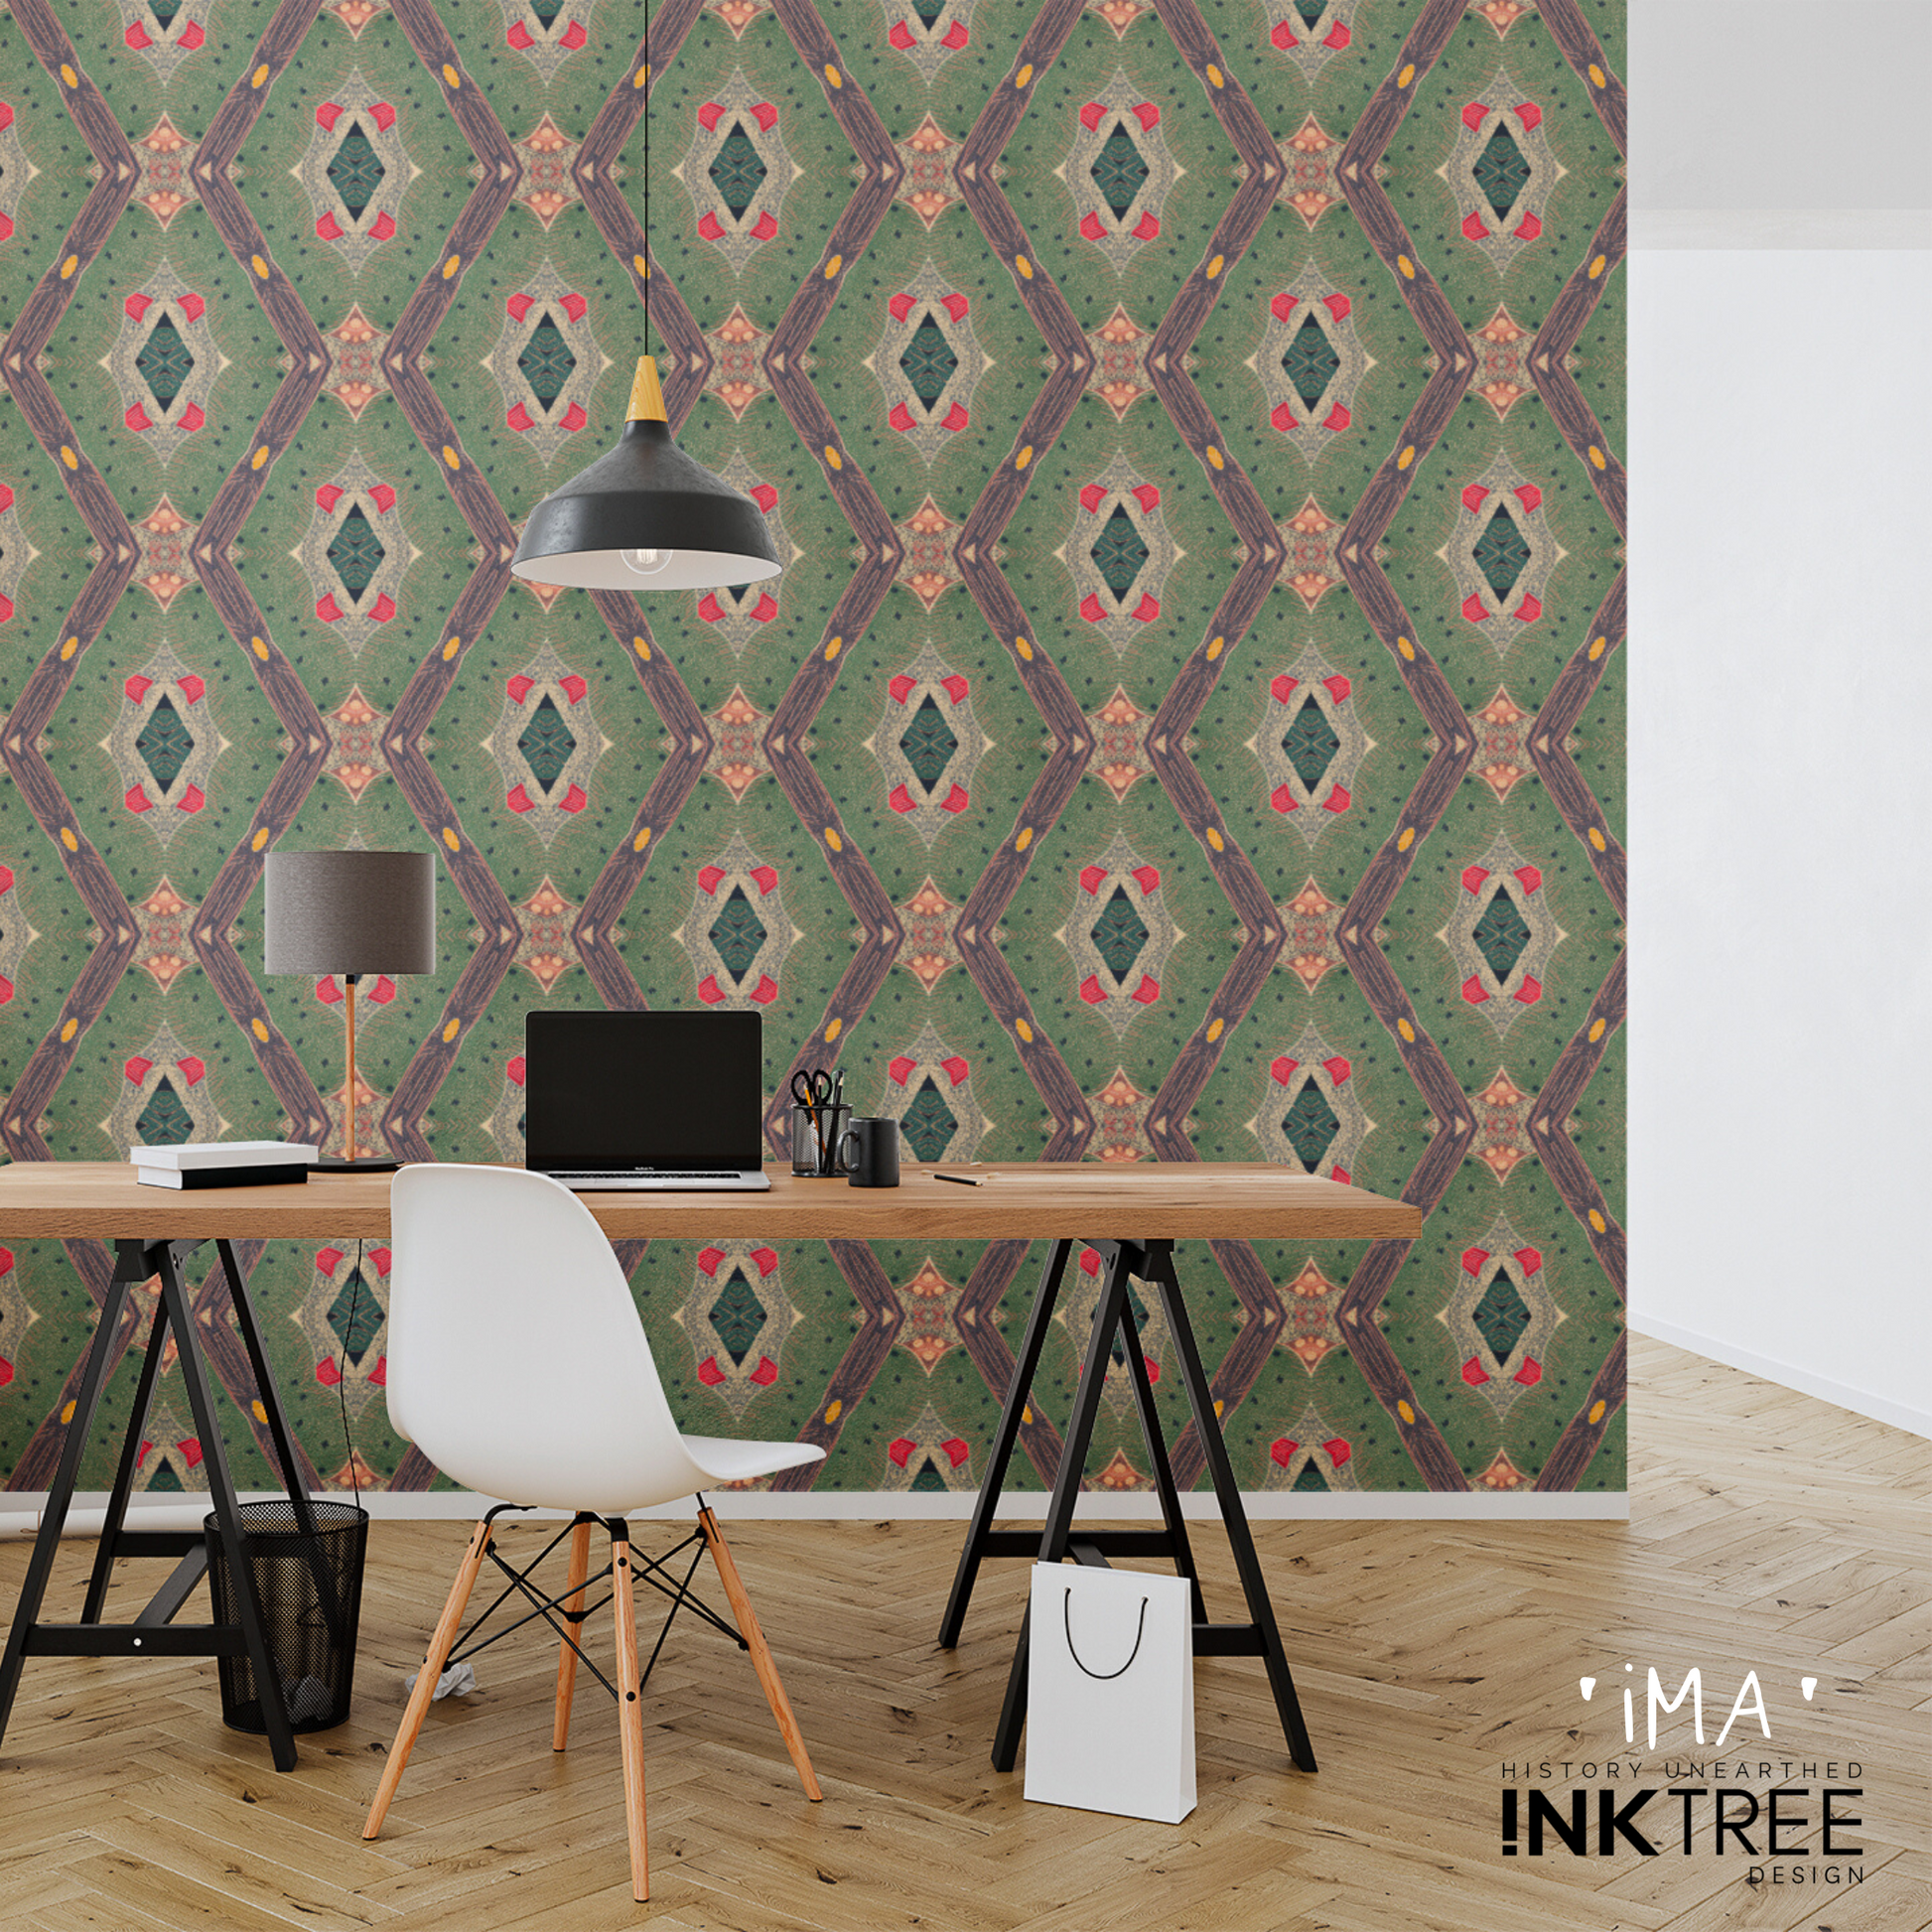 A room with a gold, black, green, red and white oriental looking pattern wall paper. With a white wall adjacent to it.  A black and white pendant light hanging from the ceiling, a wood desk with black legs with a black shaded desk lamp with a wood stand, a laptop computer, a black mug, scissors, note pad and books on the desk.  There's a white chair with wood legs, a black wire waste basket, a screwed up paper ball and a white paper shopping bag with black rope handles on a parquetry wood floor. 